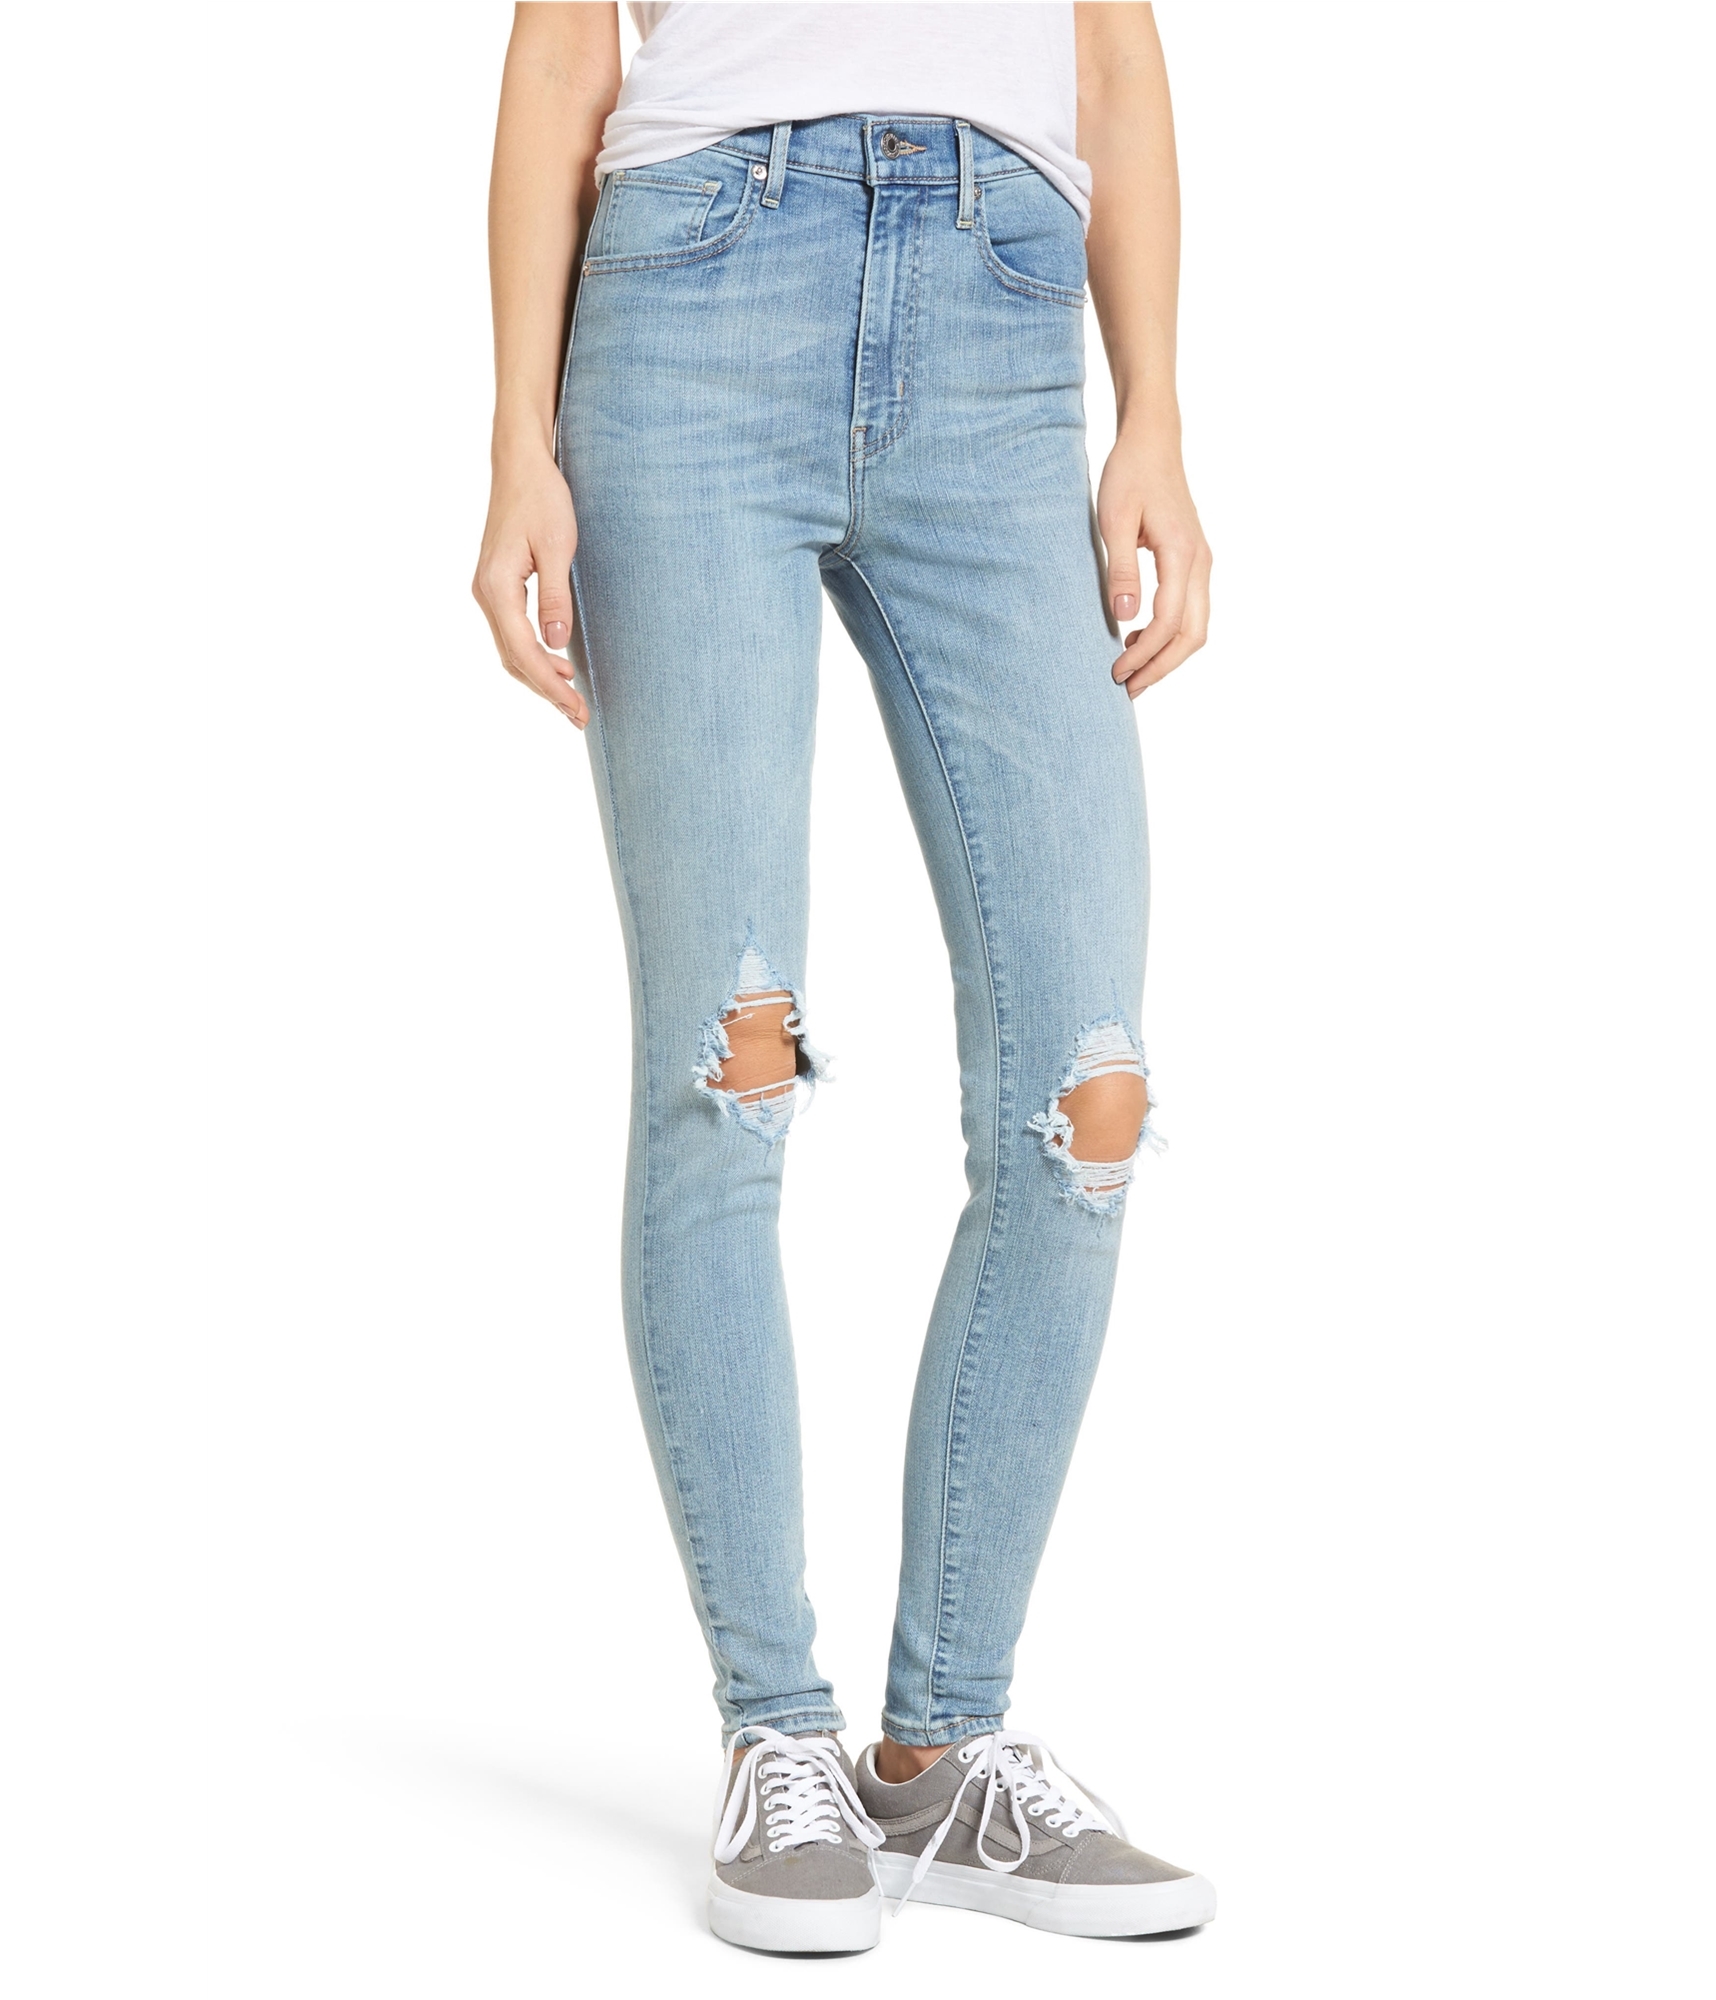 Buy a Womens Levi's Ripped Knees Skinny Fit Jeans Online 